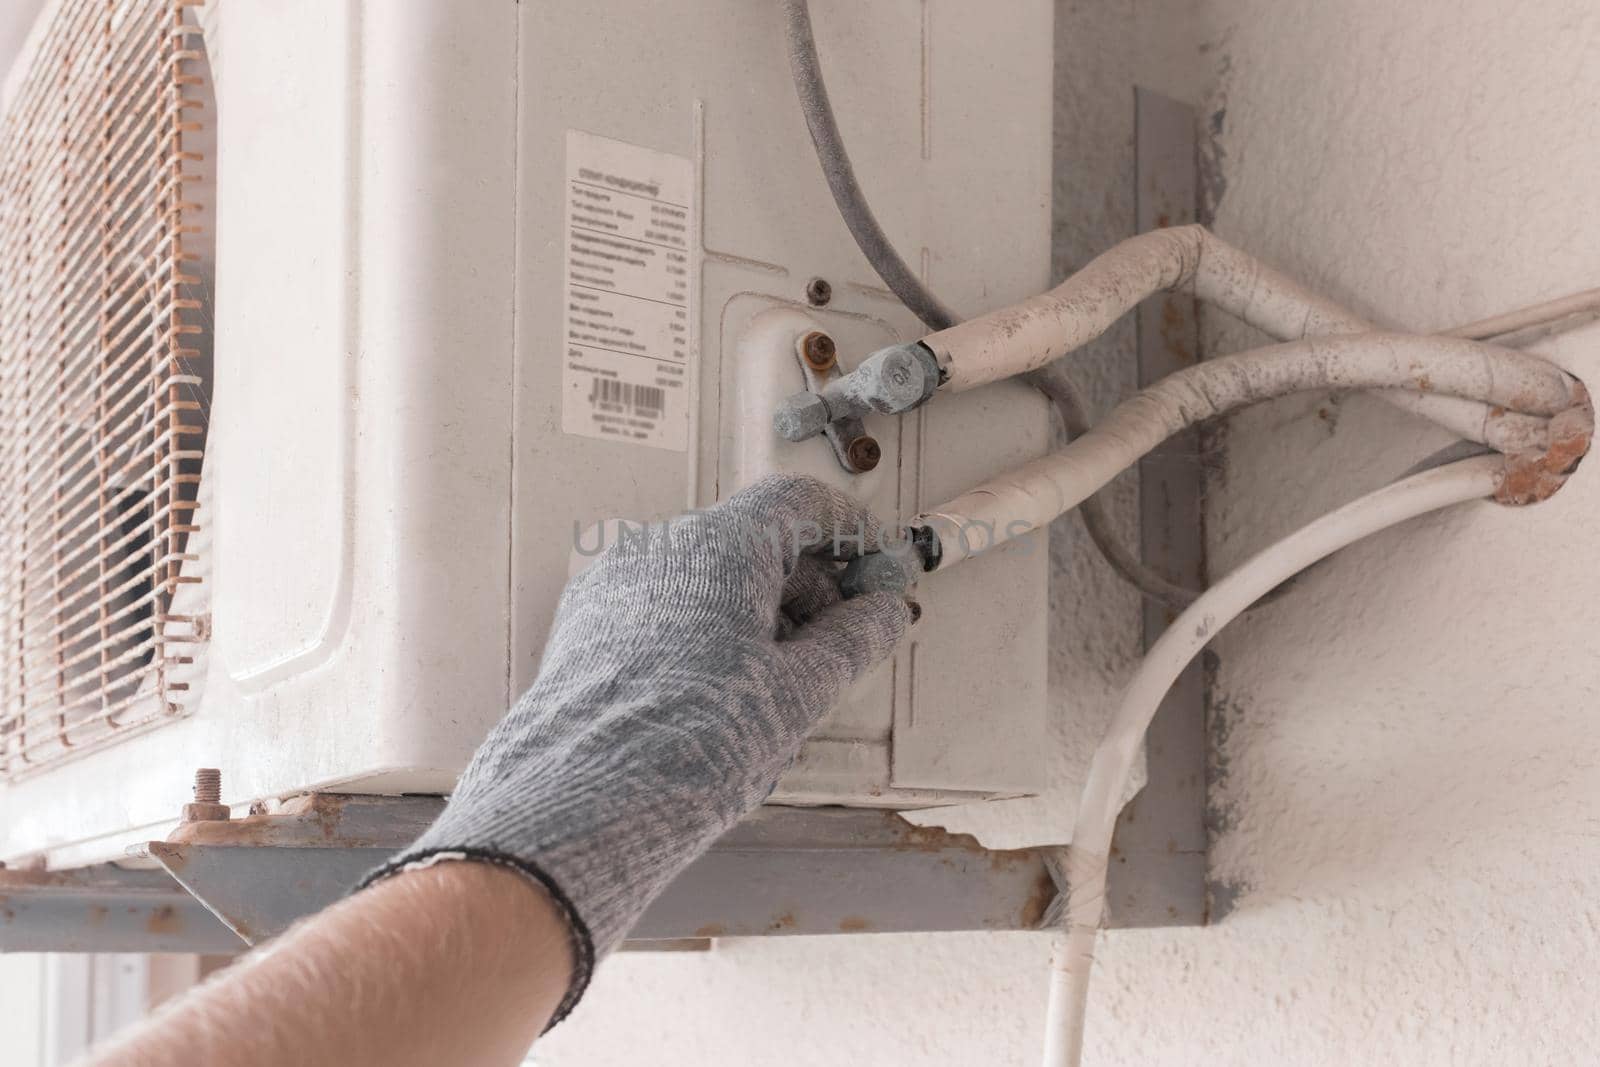 The hand of an air conditioner repair and maintenance specialist in a construction glove working with air-conditioned old equipment.